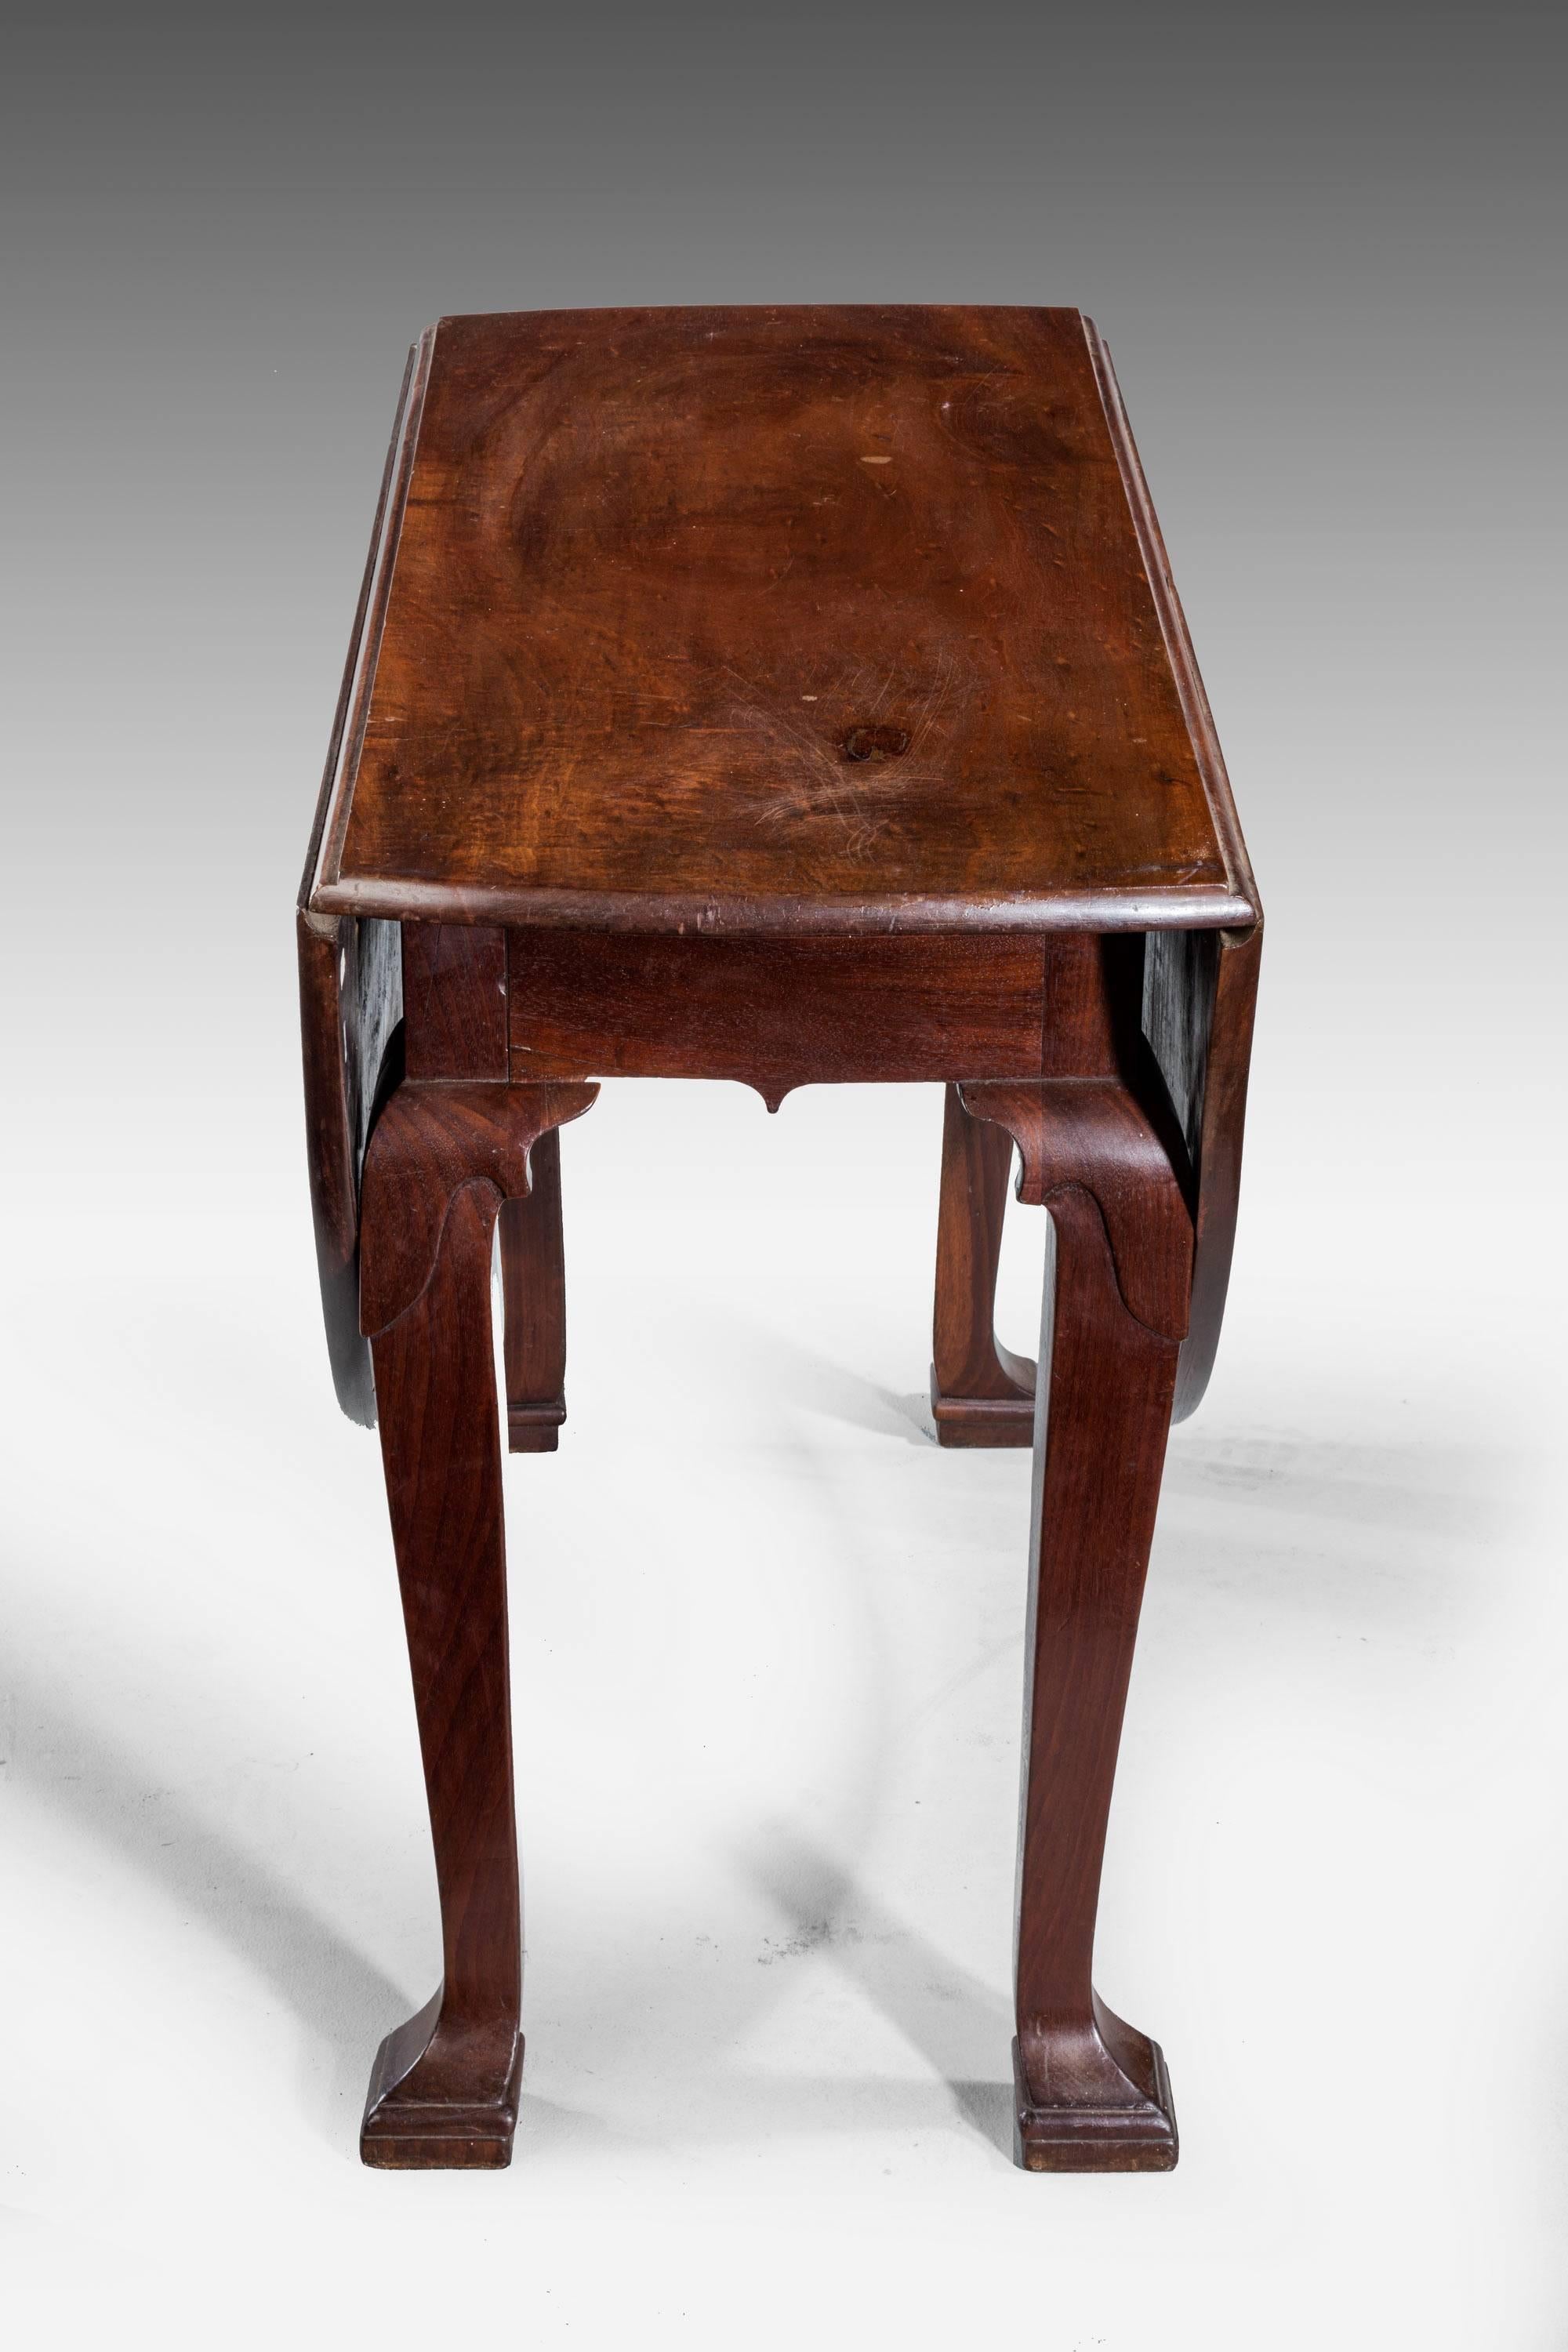 A late 18th century oval drop-leaf table. On unusual square section cabriole supports ending in block toes. Well figured and in excellent overall condition.